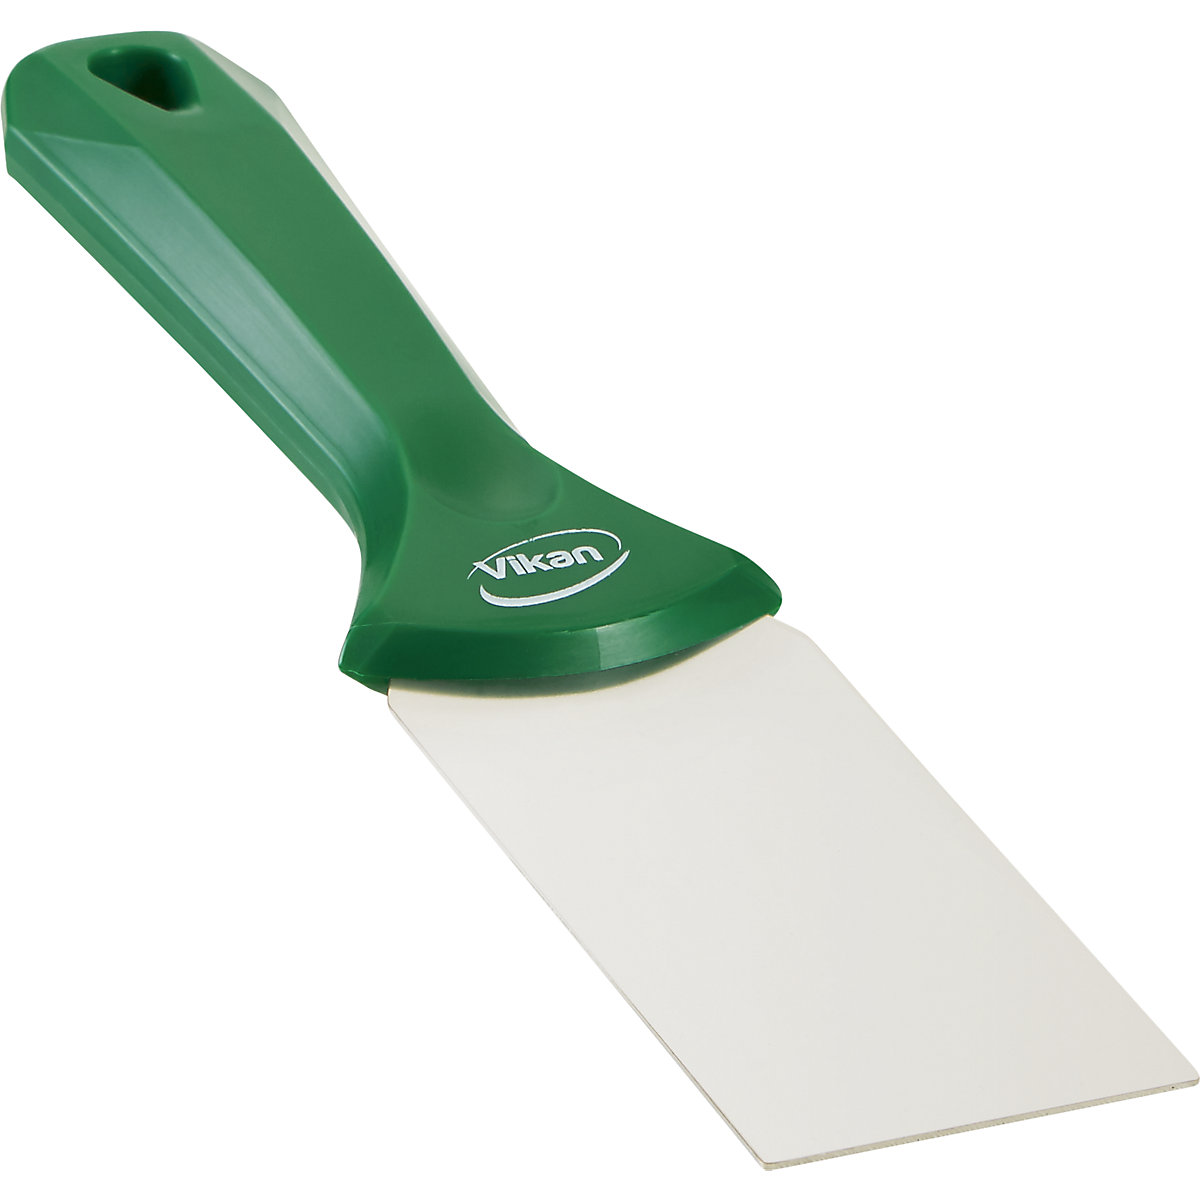 Hand scraper with stainless steel blade - Vikan